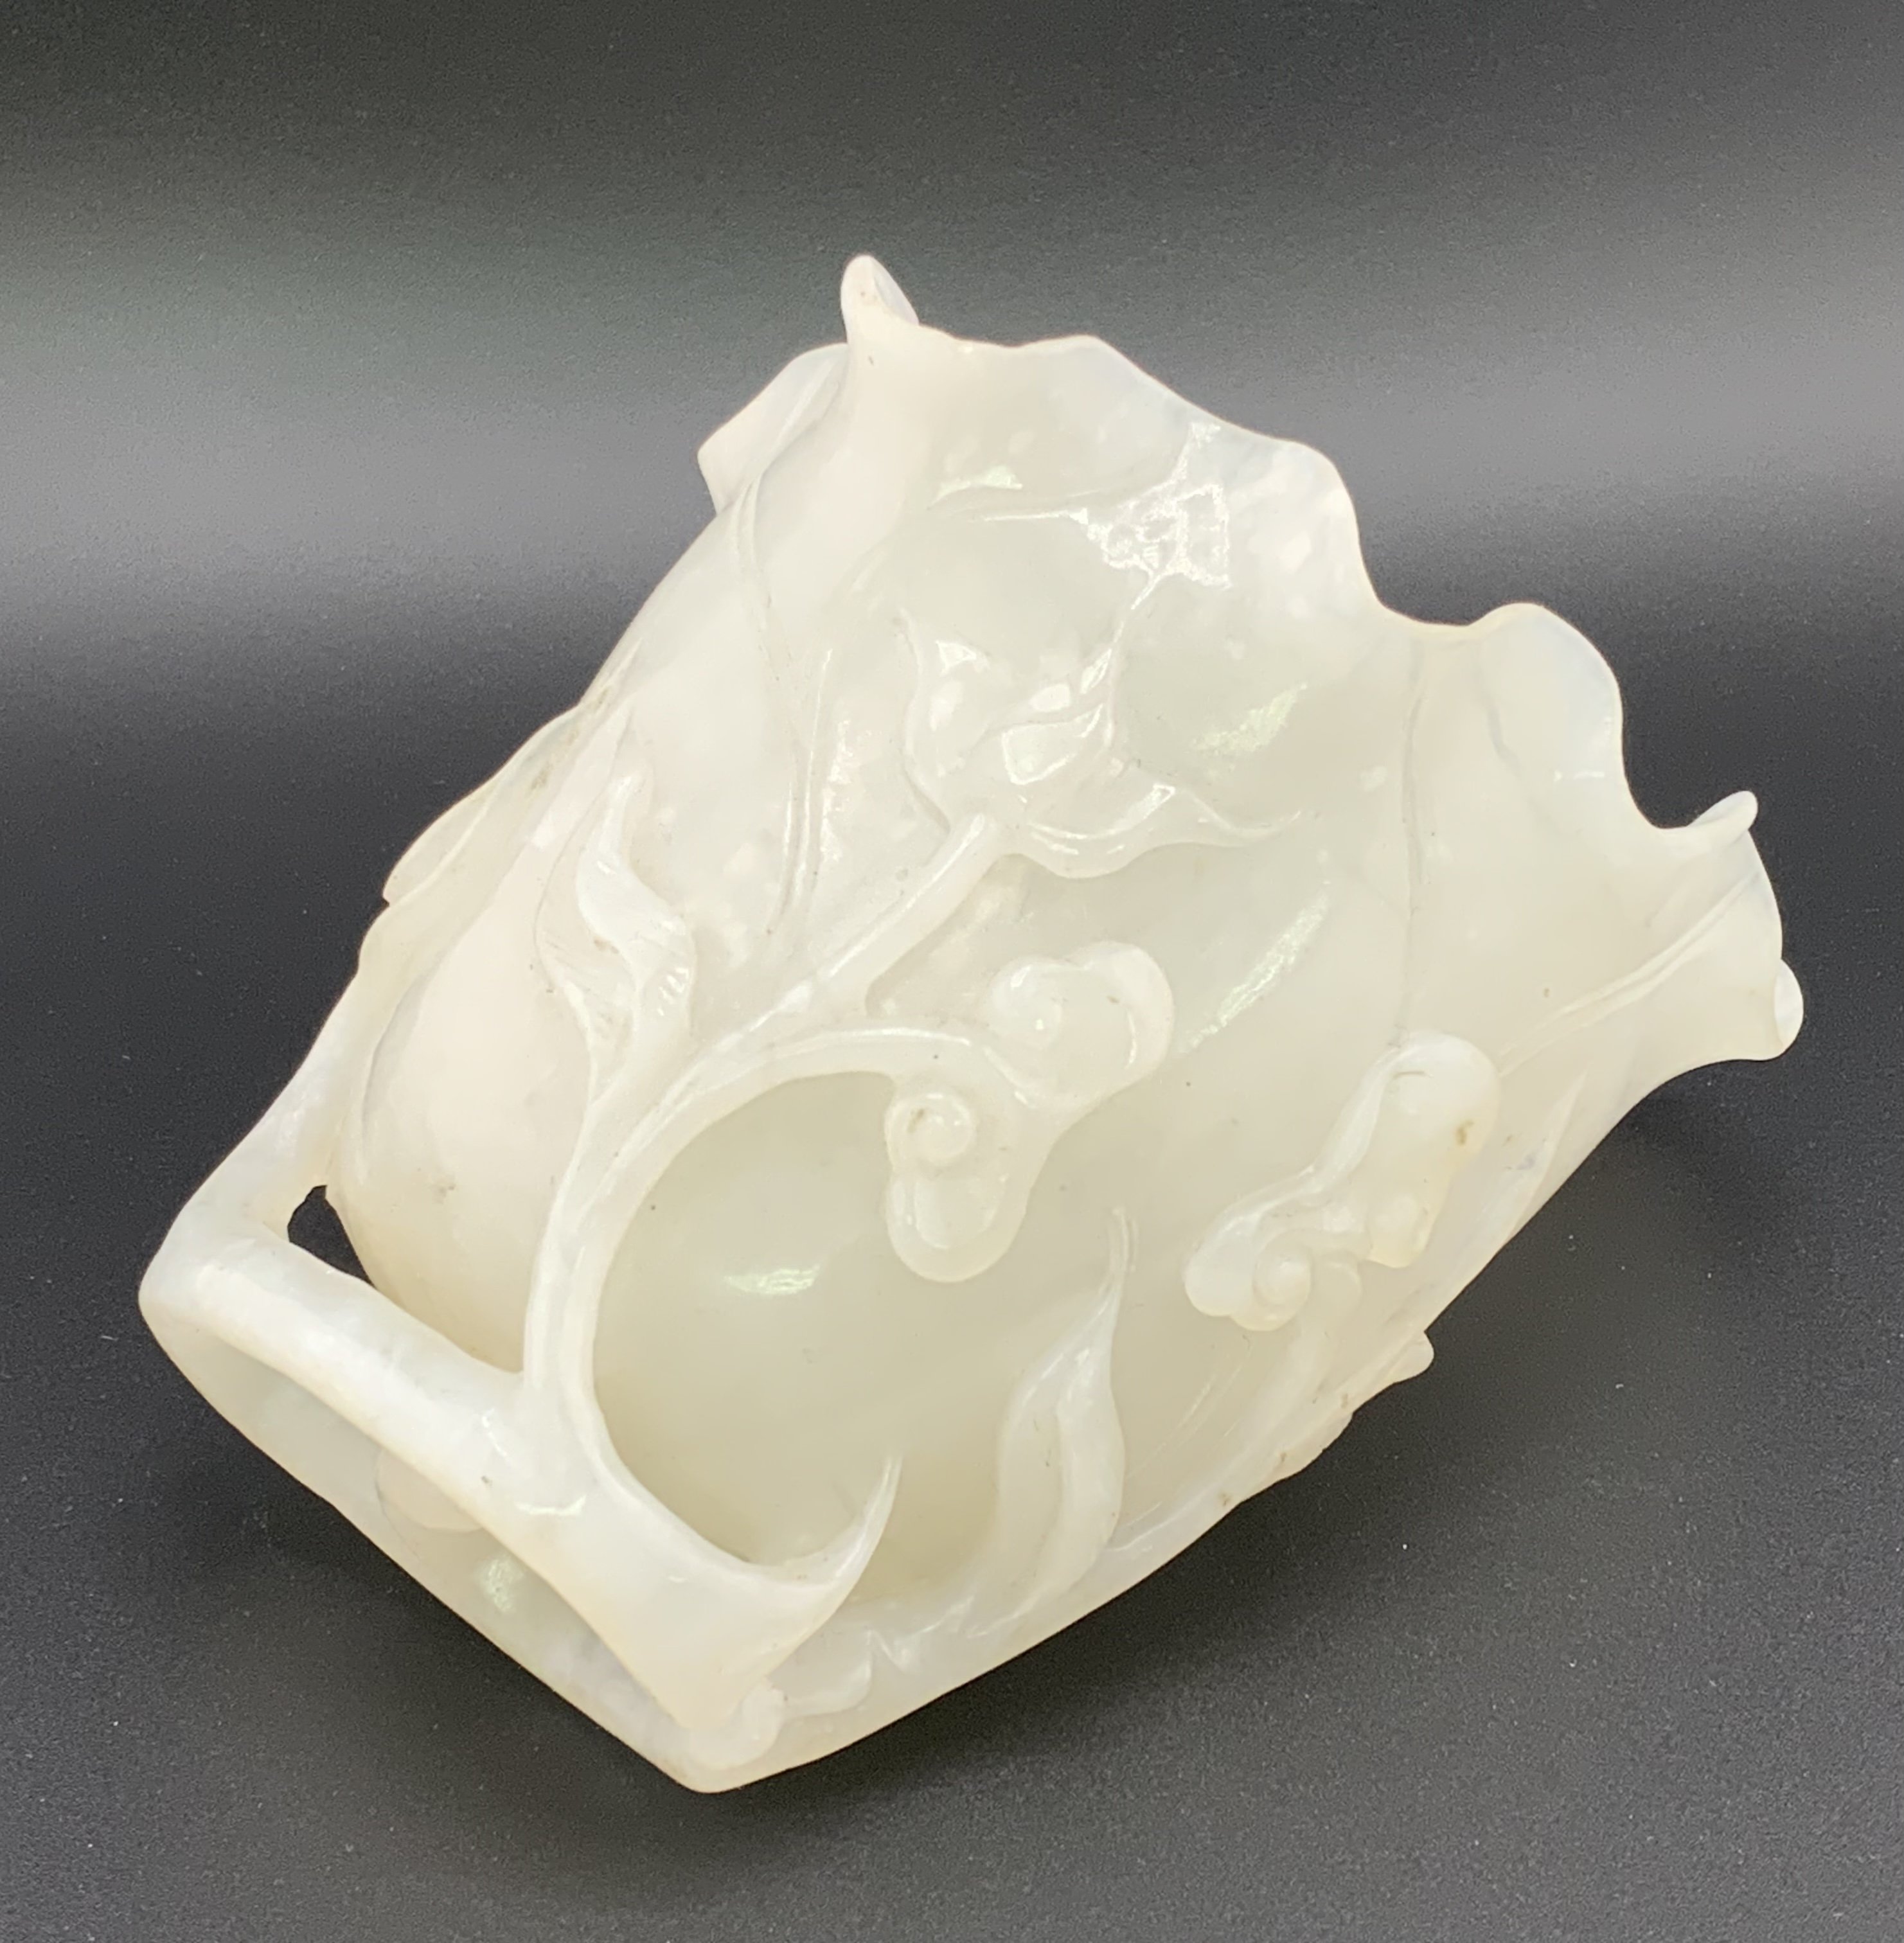 A Chinese carved white jade vase In furled lotus l - Image 4 of 5